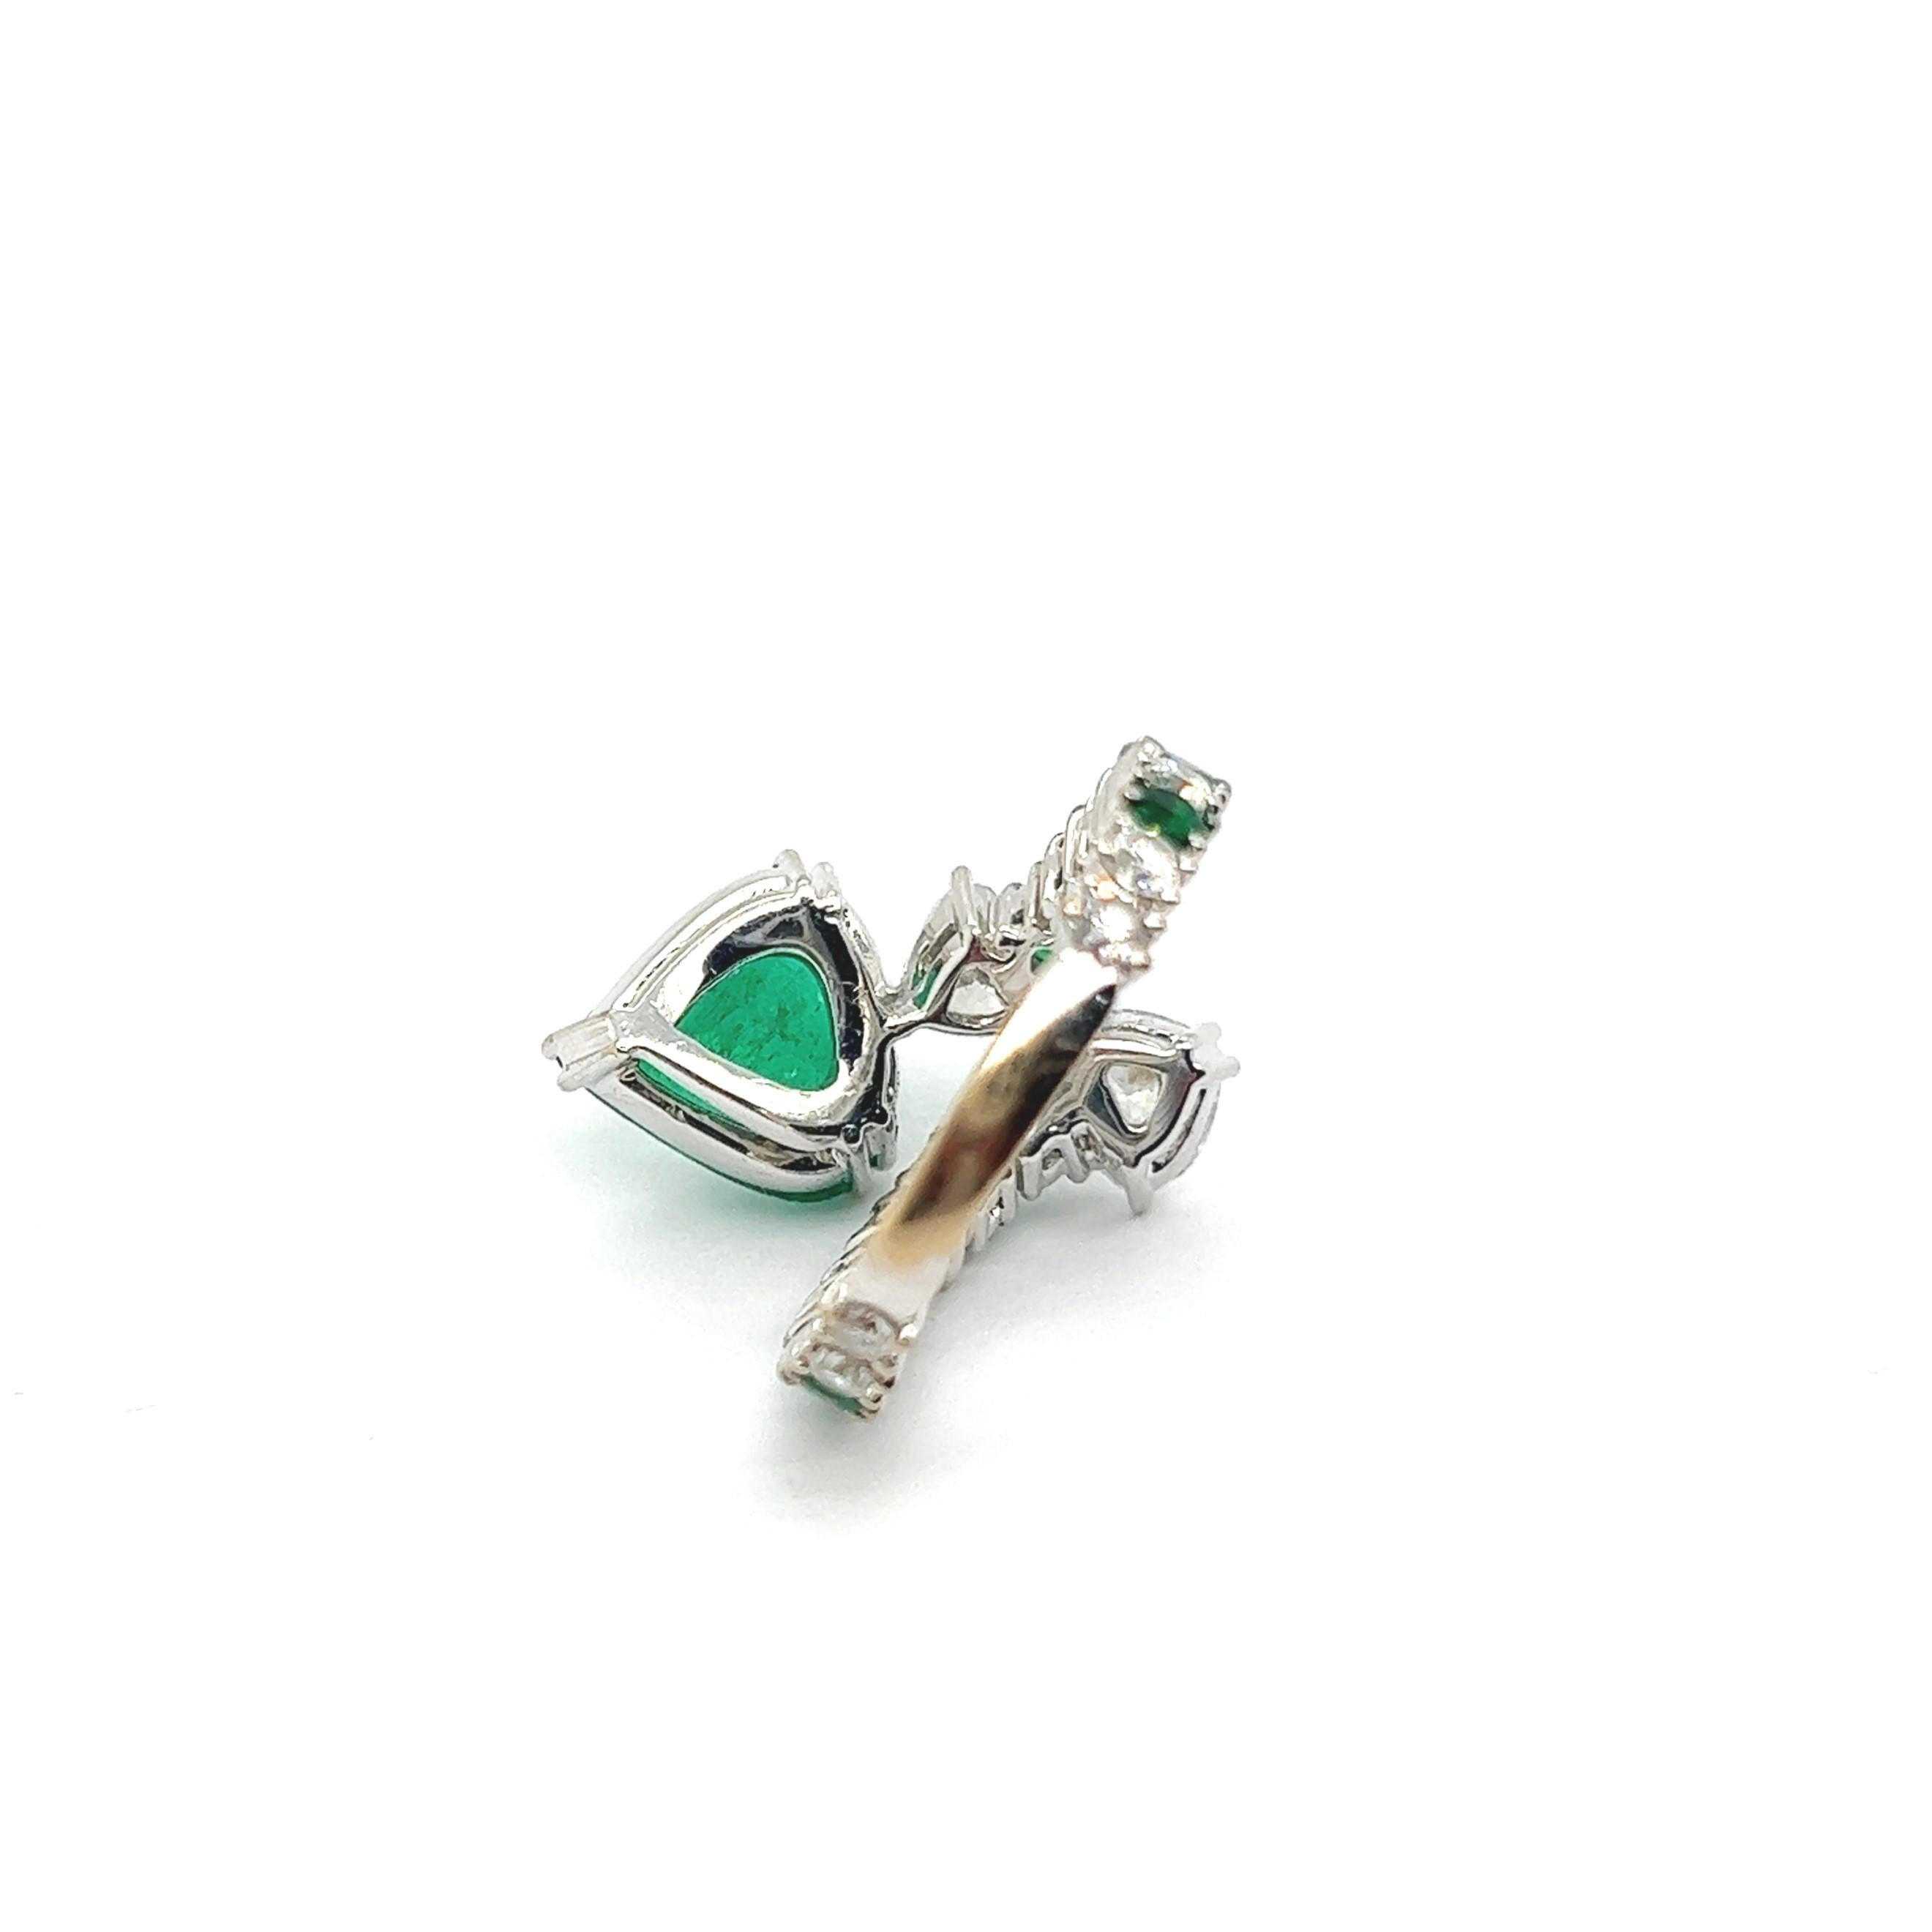 Gübelin Certified 4.20 Carat Emerald Ring with Diamonds in 18 Karat White Gold For Sale 2